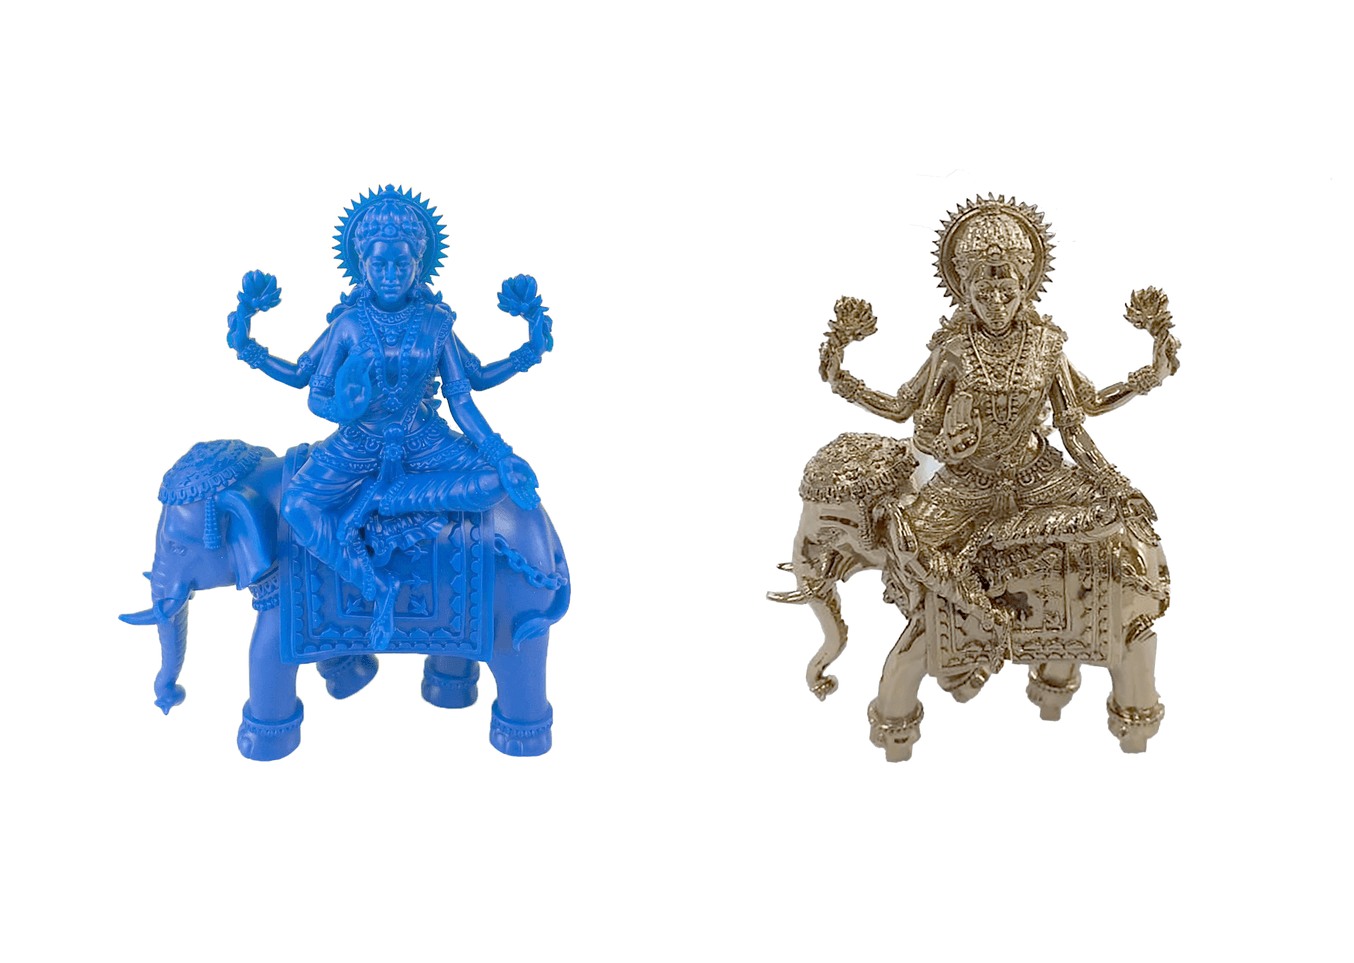 a religious idol 3d printed in wax resin and another religious idol after post-processing in brass